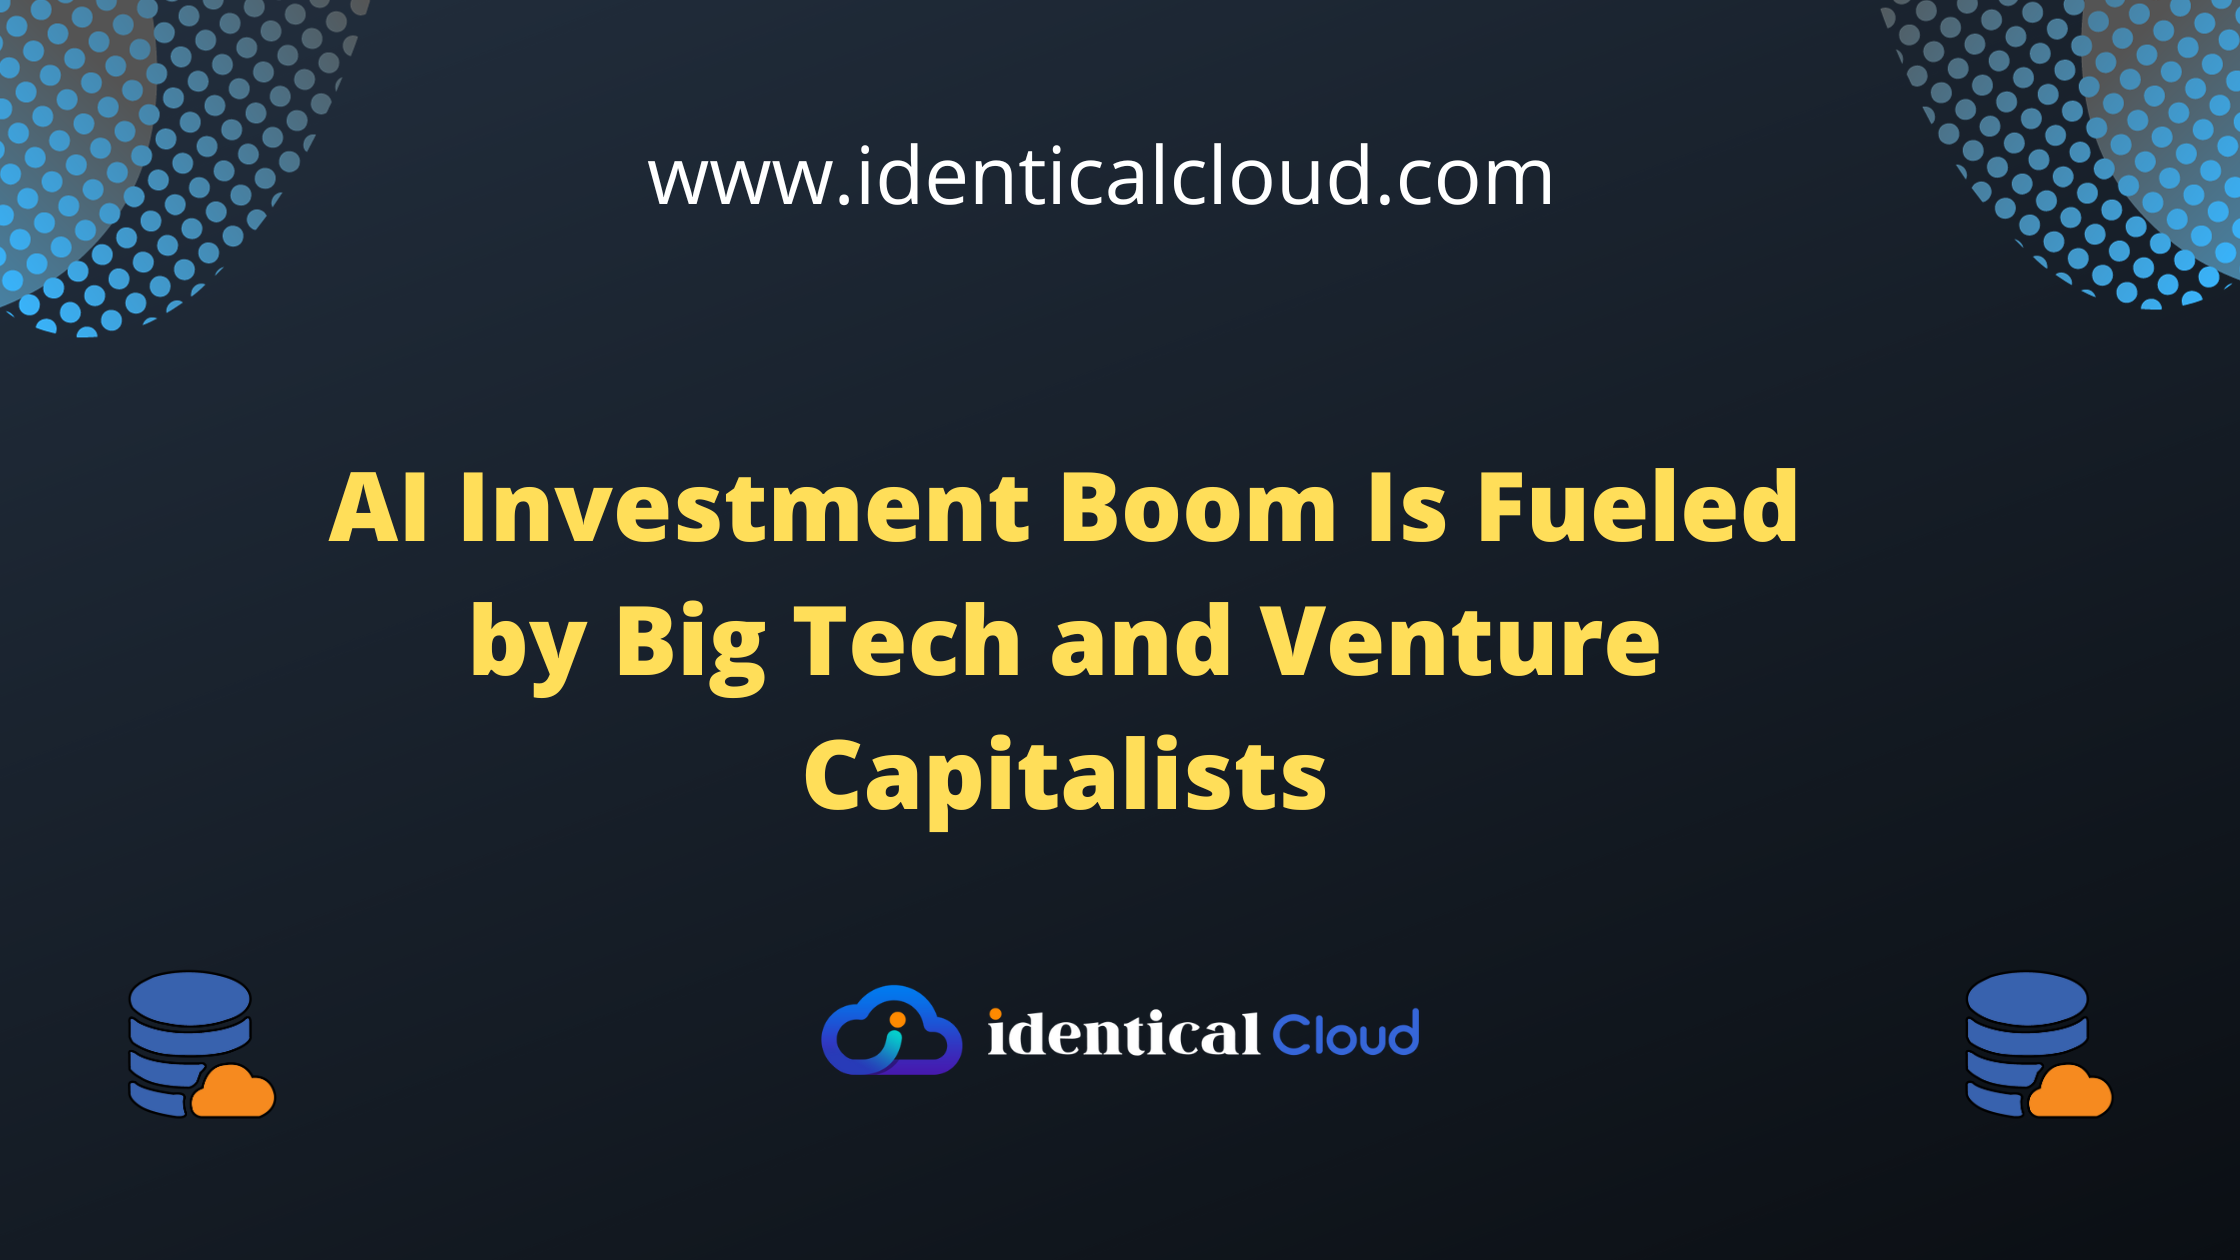 AI Investment Boom Is Fueled by Big Tech and Venture Capitalists - identicalcloud.com